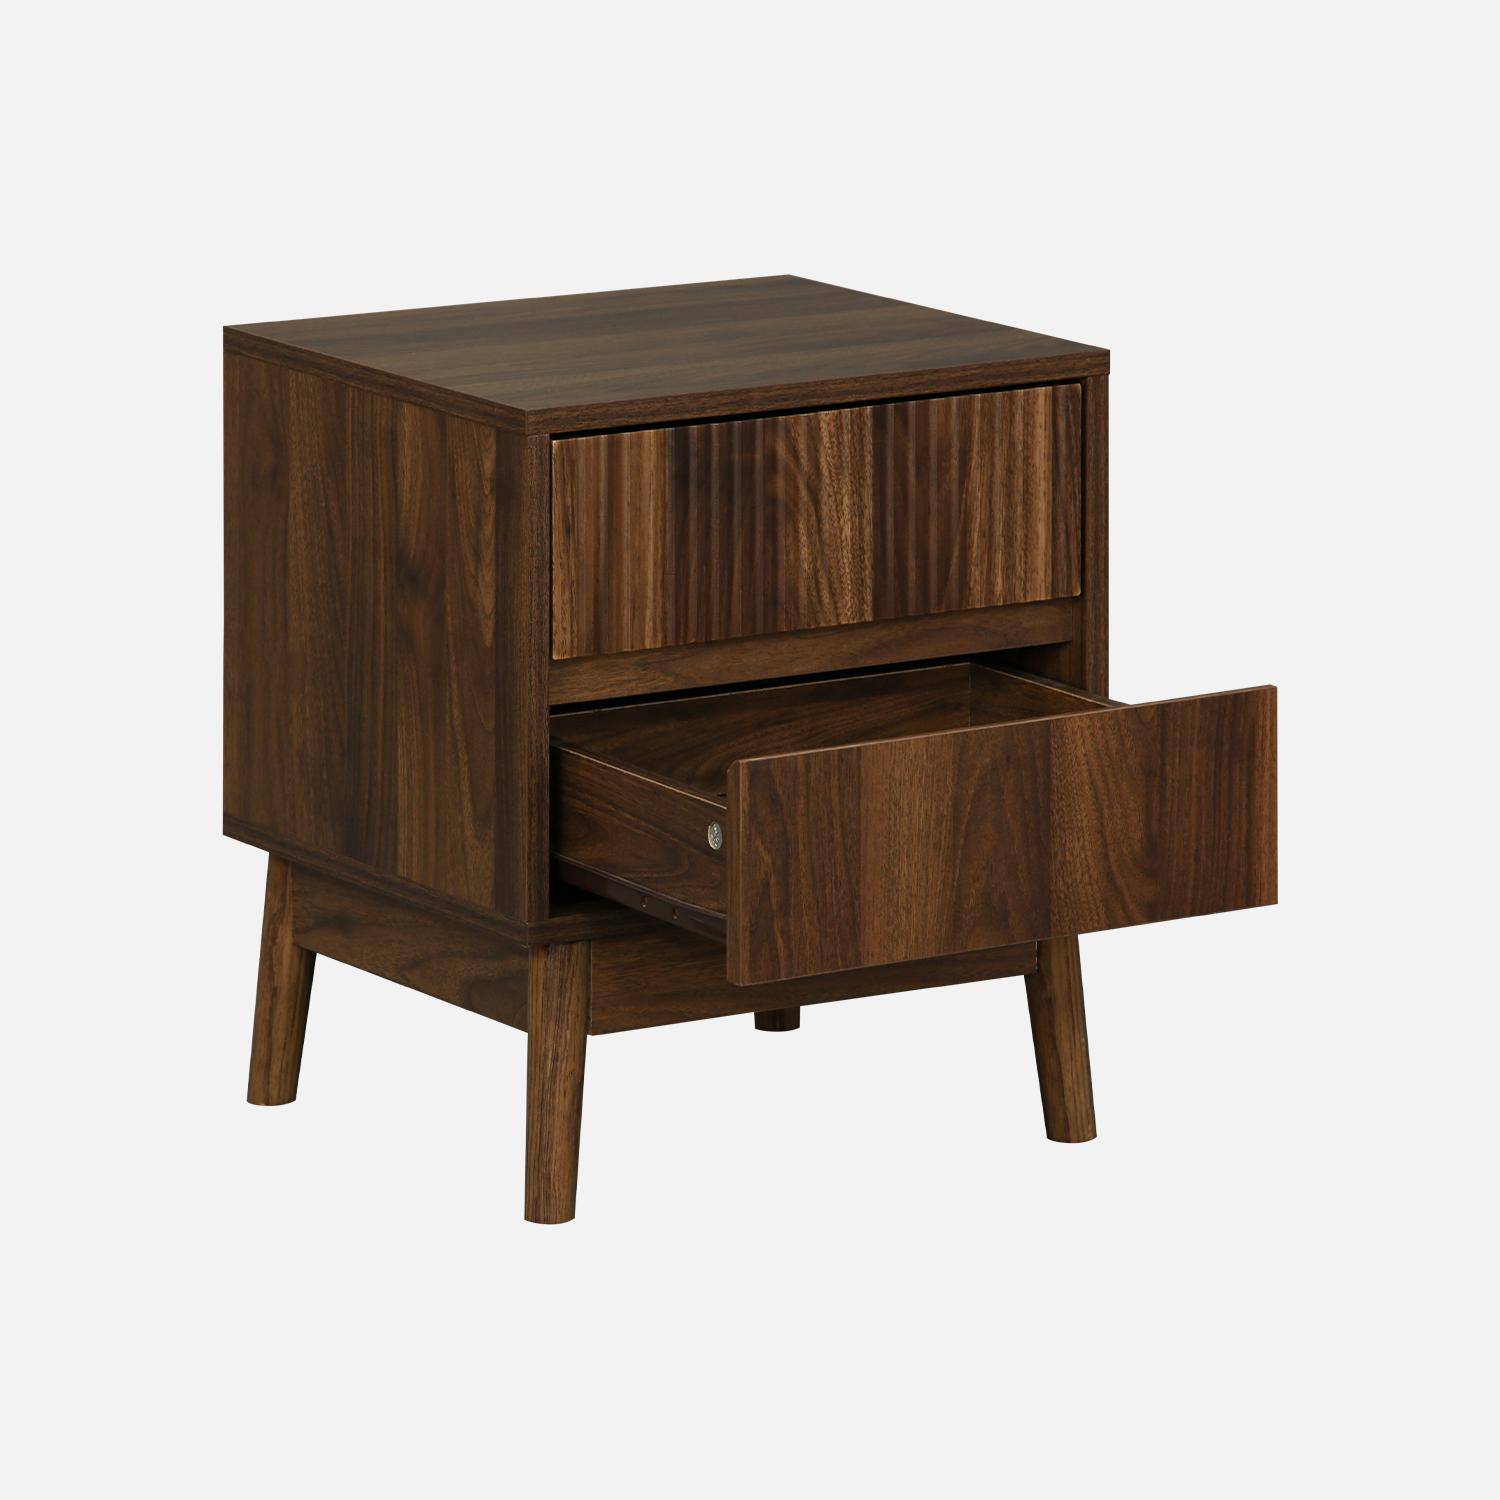 Pair of grooved wooden bedside tables with 2 drawers, 40x39x48cm - Linear - Dark Wood colour Photo6